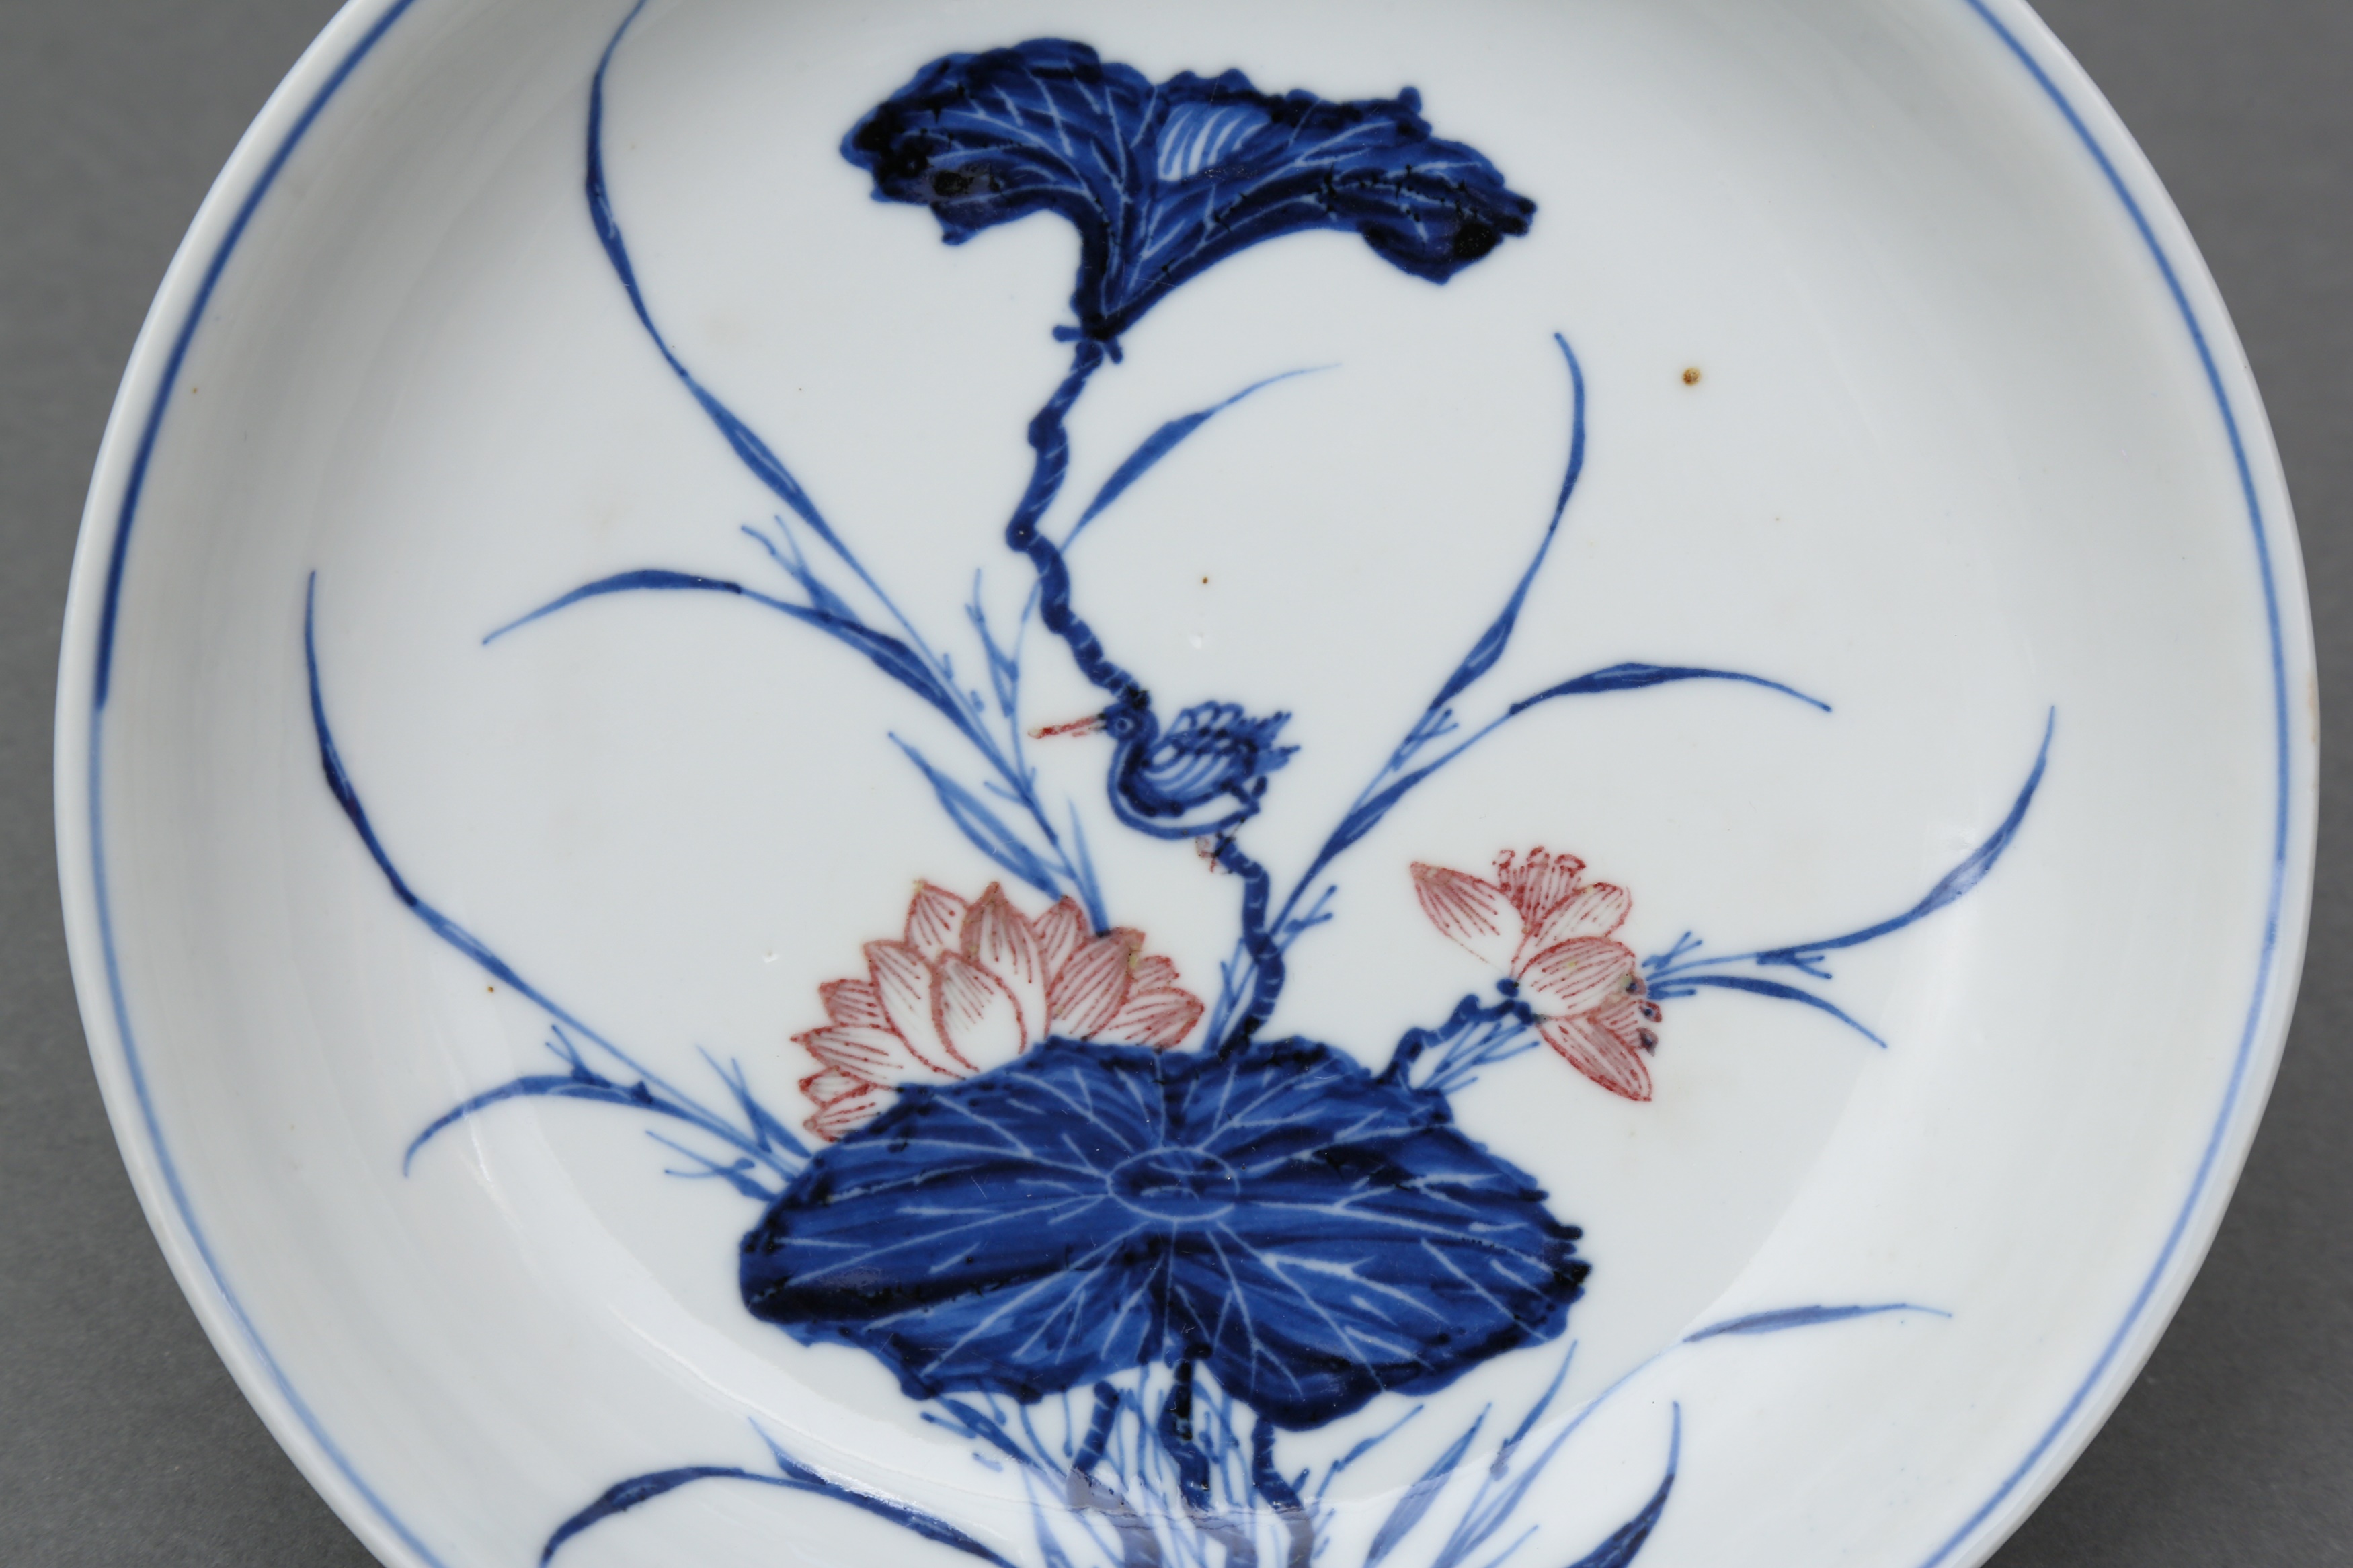 A RARE CHINESE BLUE AND WHITE AND COPPER-RED 'LOTUS AND EGRET' DISH 清康熙 青花釉裡紅一路連科圖盤 - Image 4 of 13